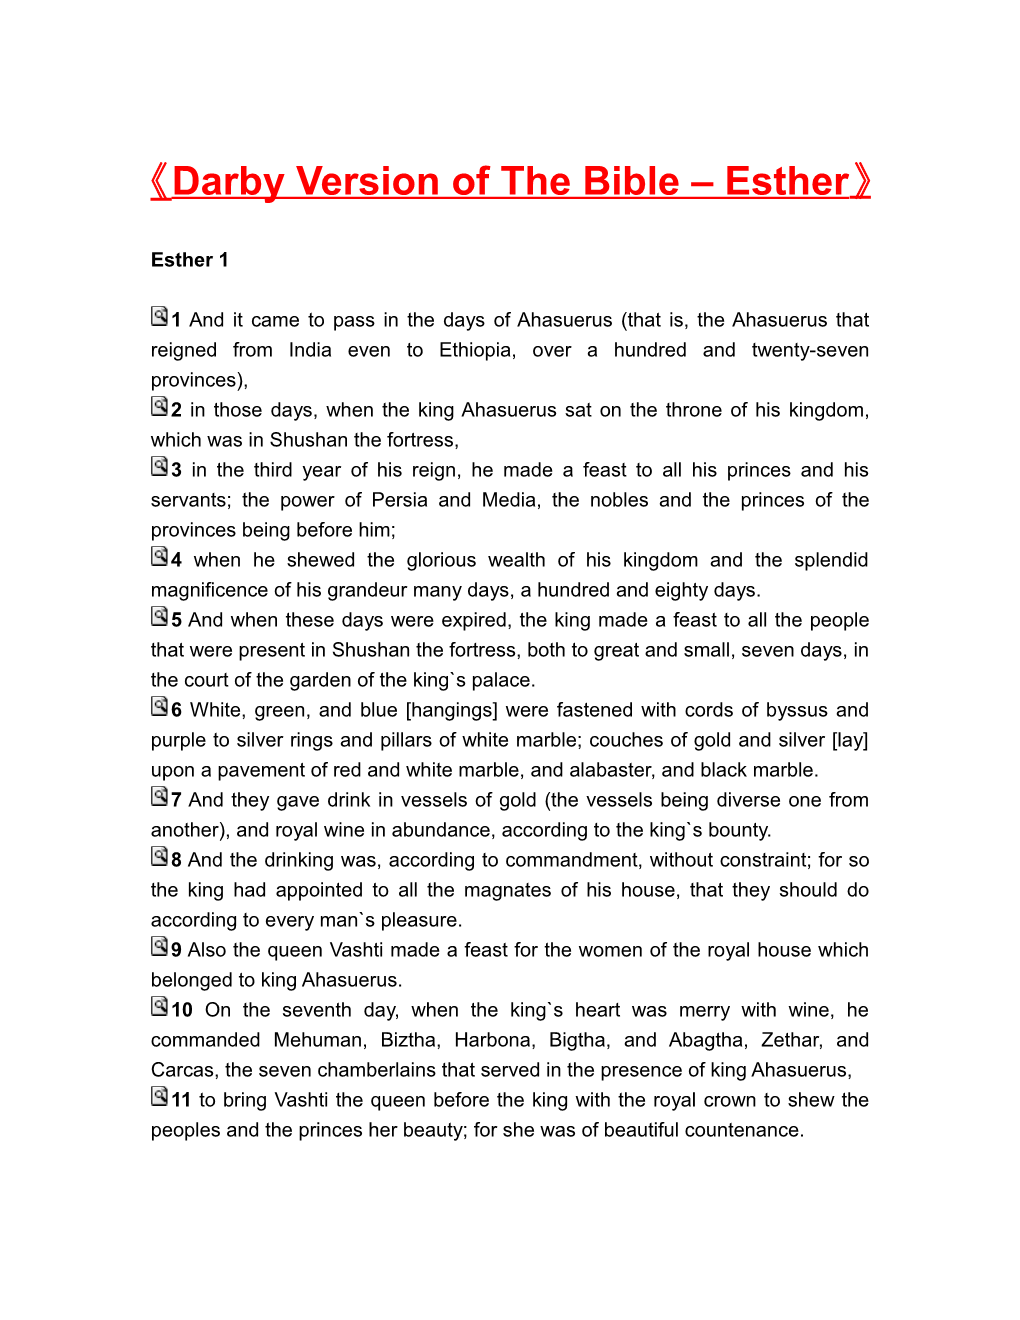 Darby Version of the Bible Esther